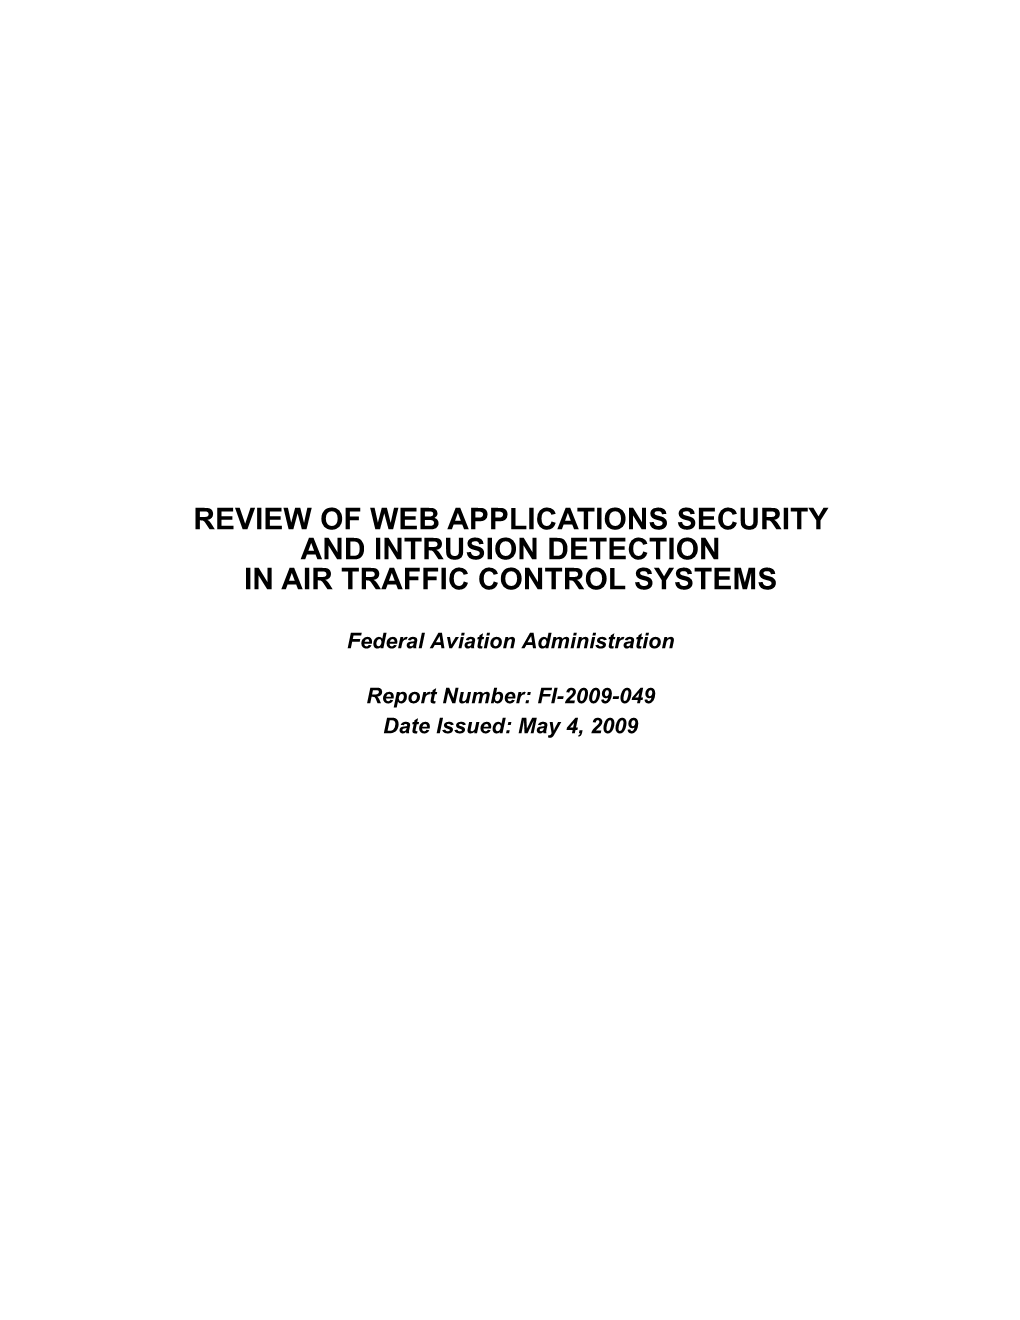 FAA Web Applications Security and Intrusion Detection in Air Traffic